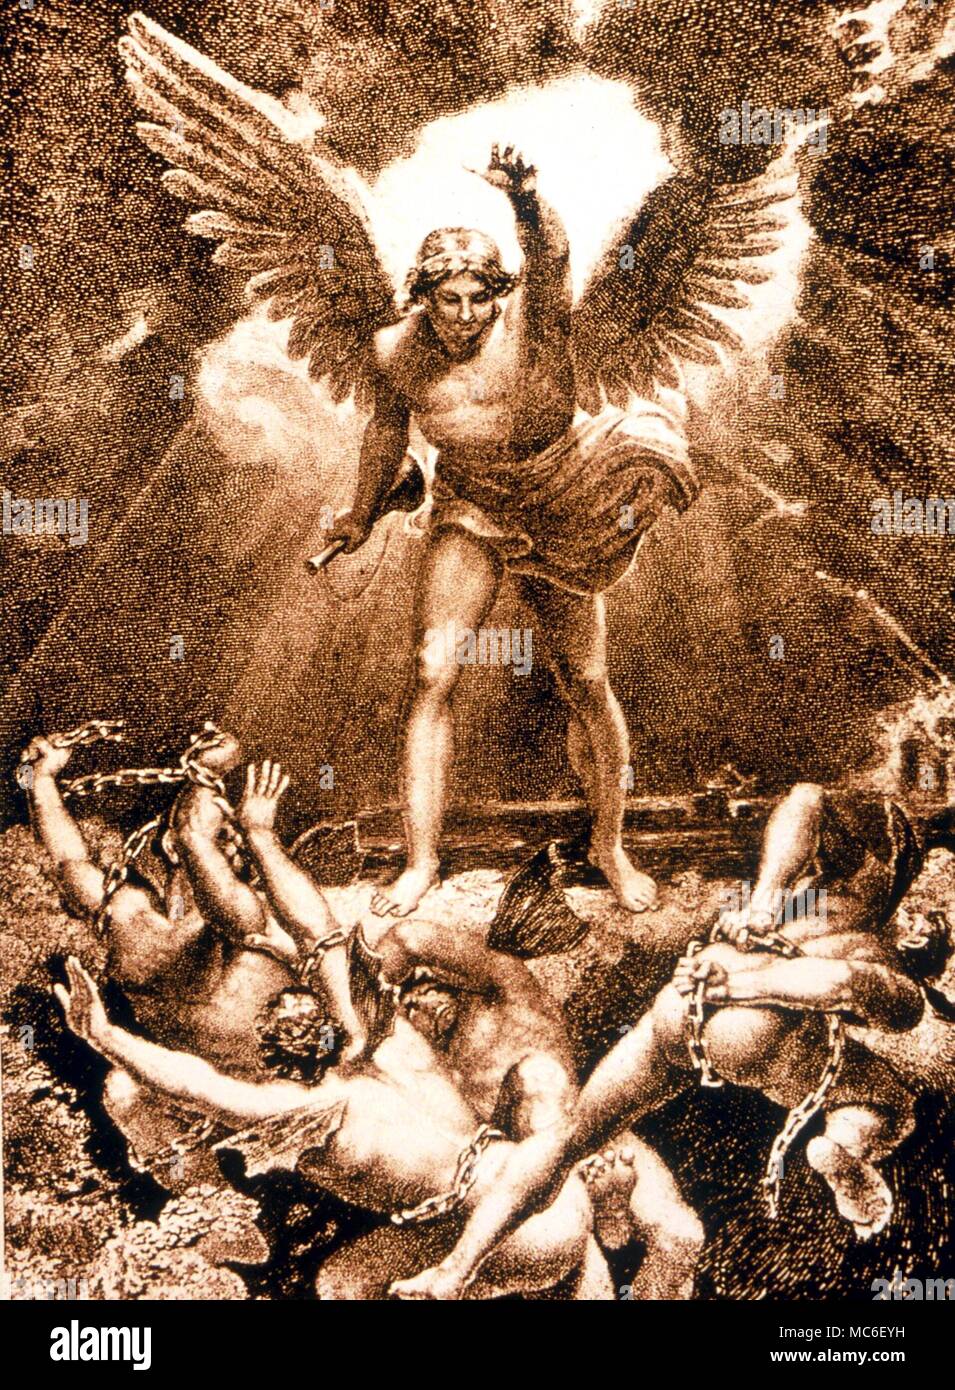 ANGELS - Archangel Michael (the archangel of the Sun) liberating the bound souls of trhe Dead Stock Photo